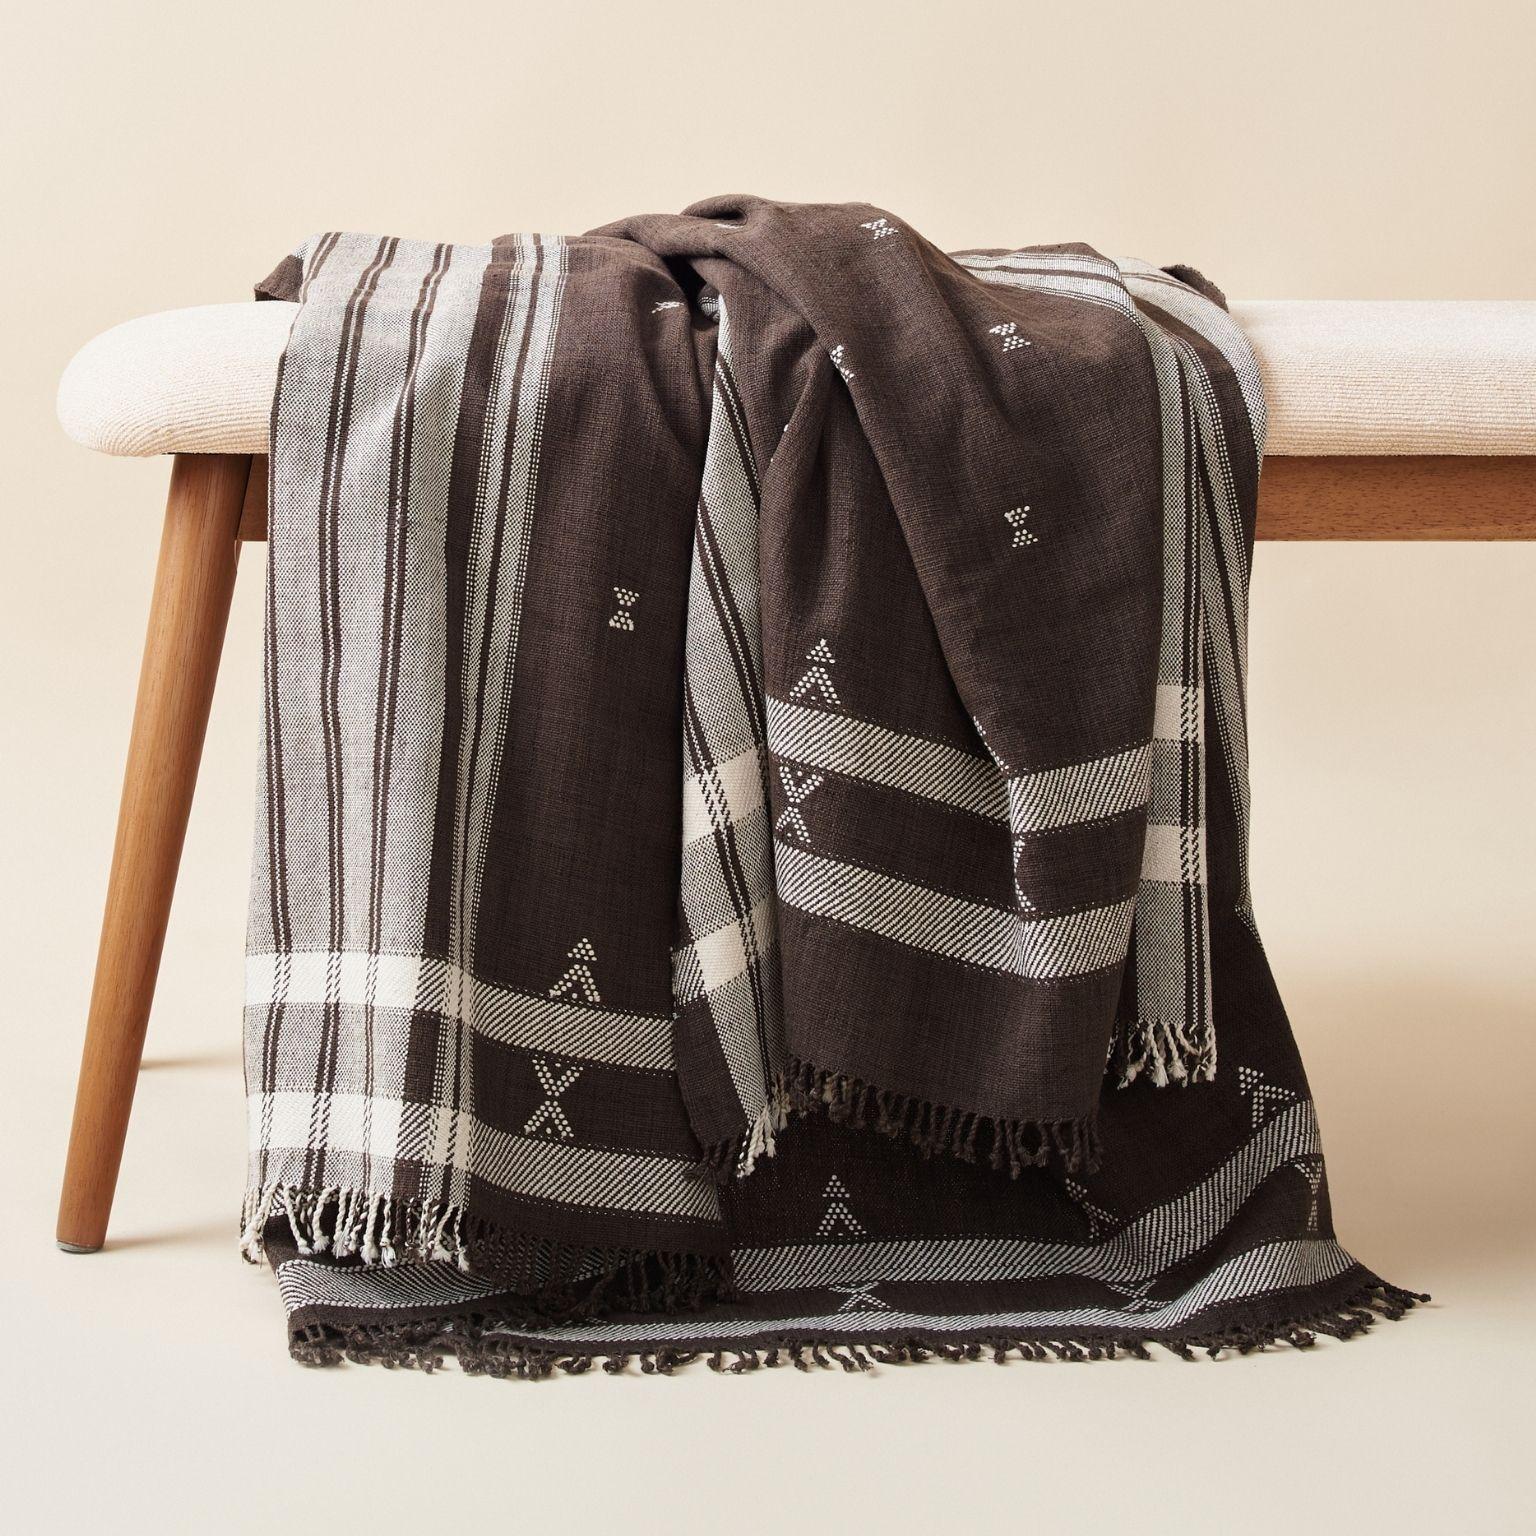 Custom design by Studio Variously, Ebony throw / bedspread / blanket is handwoven by master weavers in India and dyed entirely with earth-friendly dyes developed locally to artisan cluster.

A sustainable design brand based out of Michigan, Studio